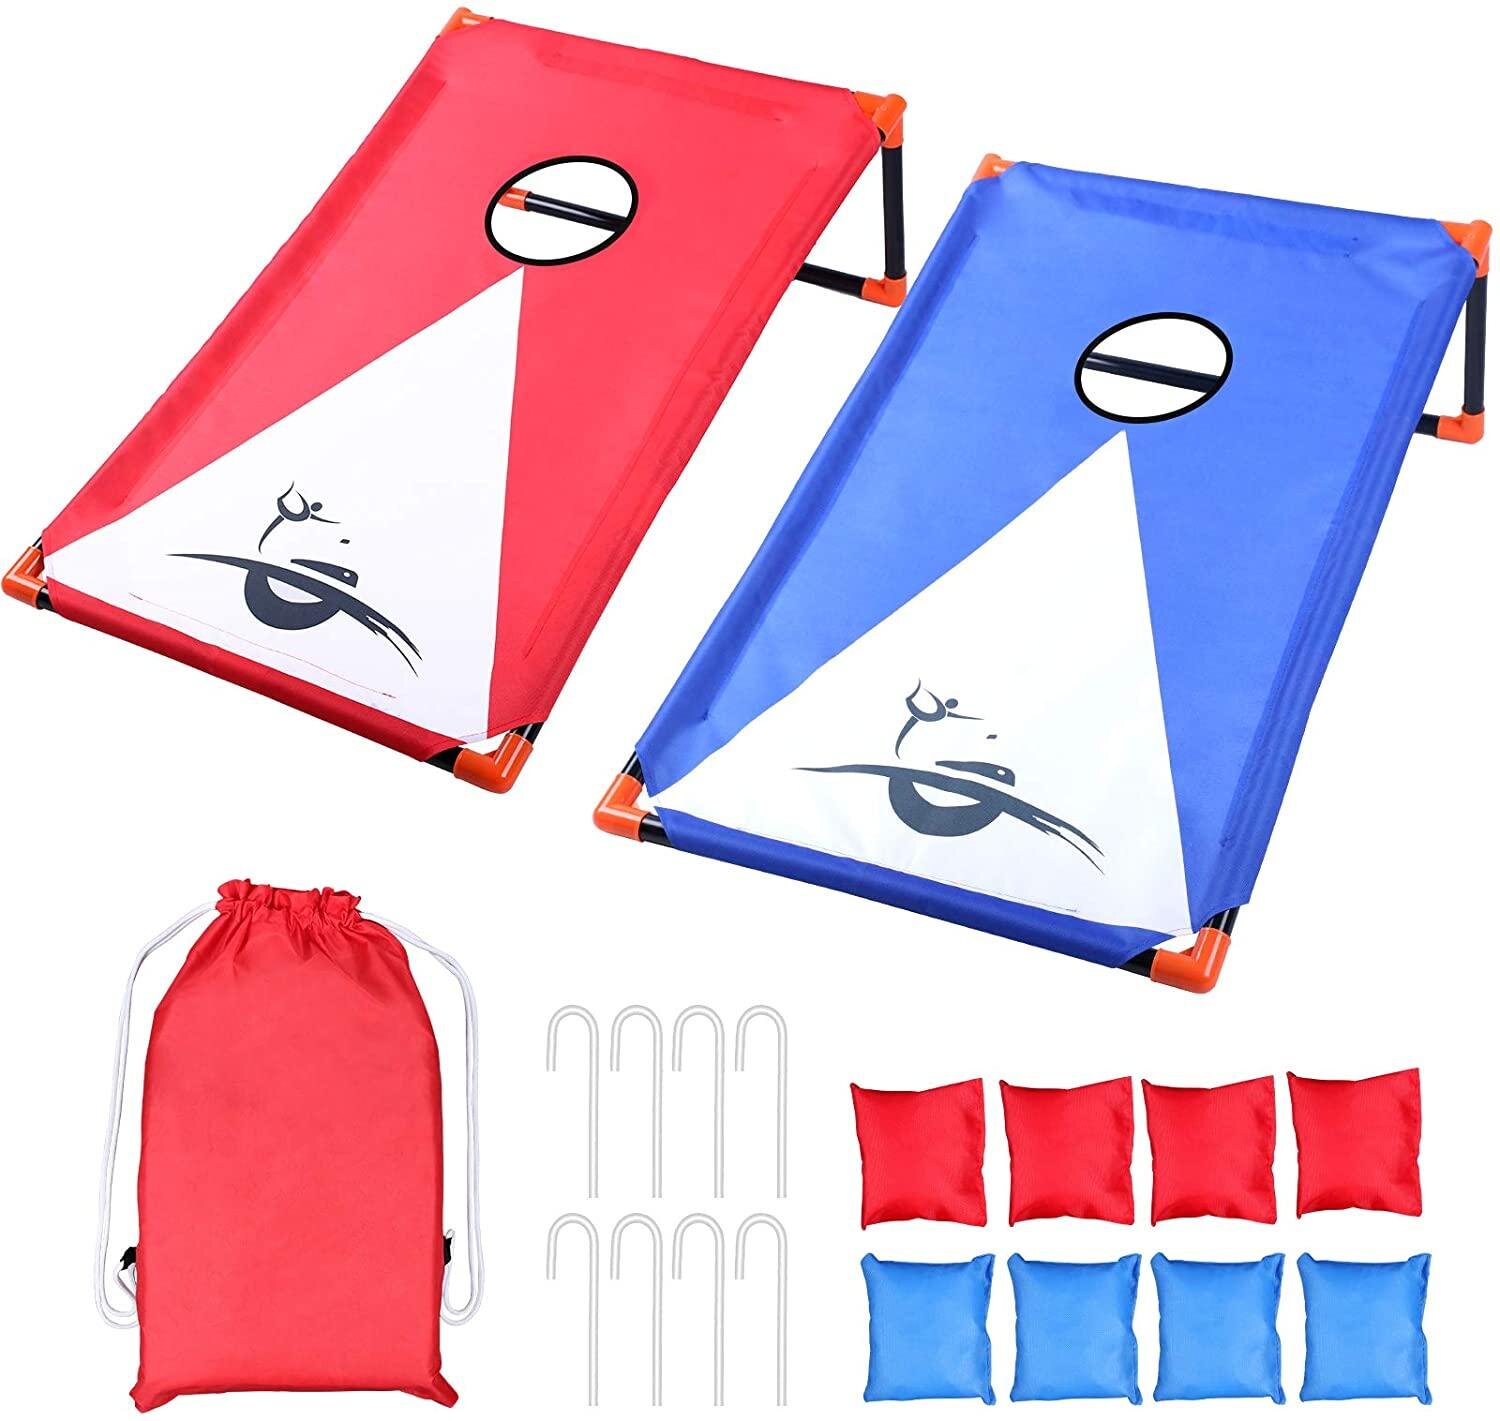 Collapsible Portable CornHole Toss Game Set With 8 Bean Bags Waterproof 3 x 2FT 